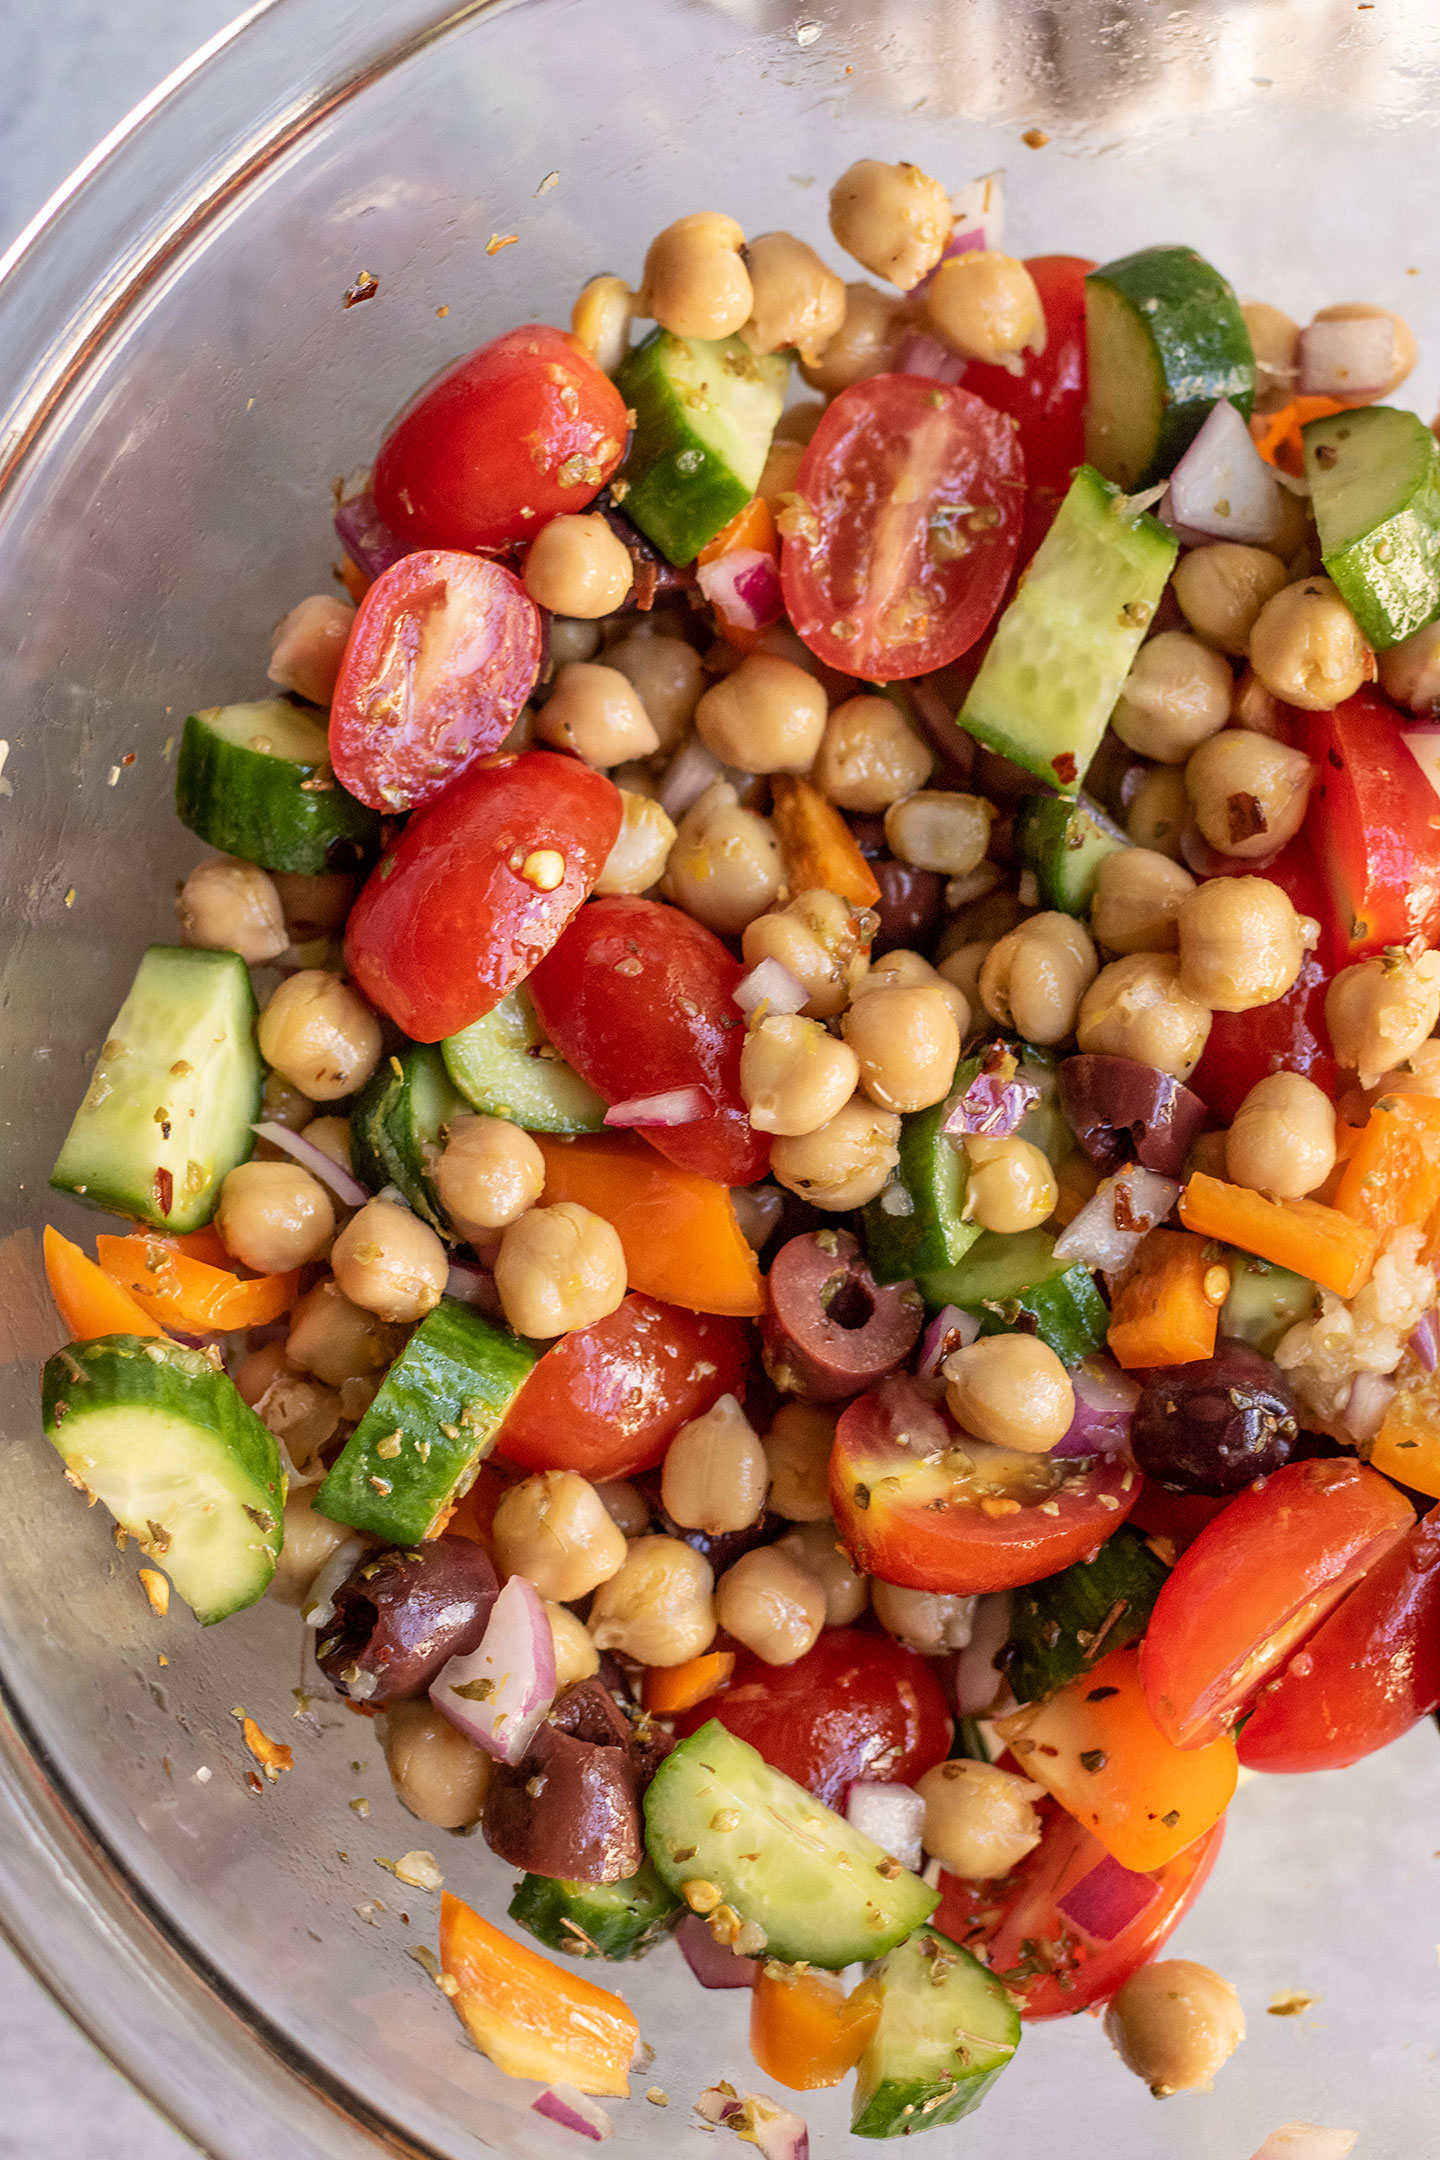 Mixing the chickpea salad together in a glass bowl.